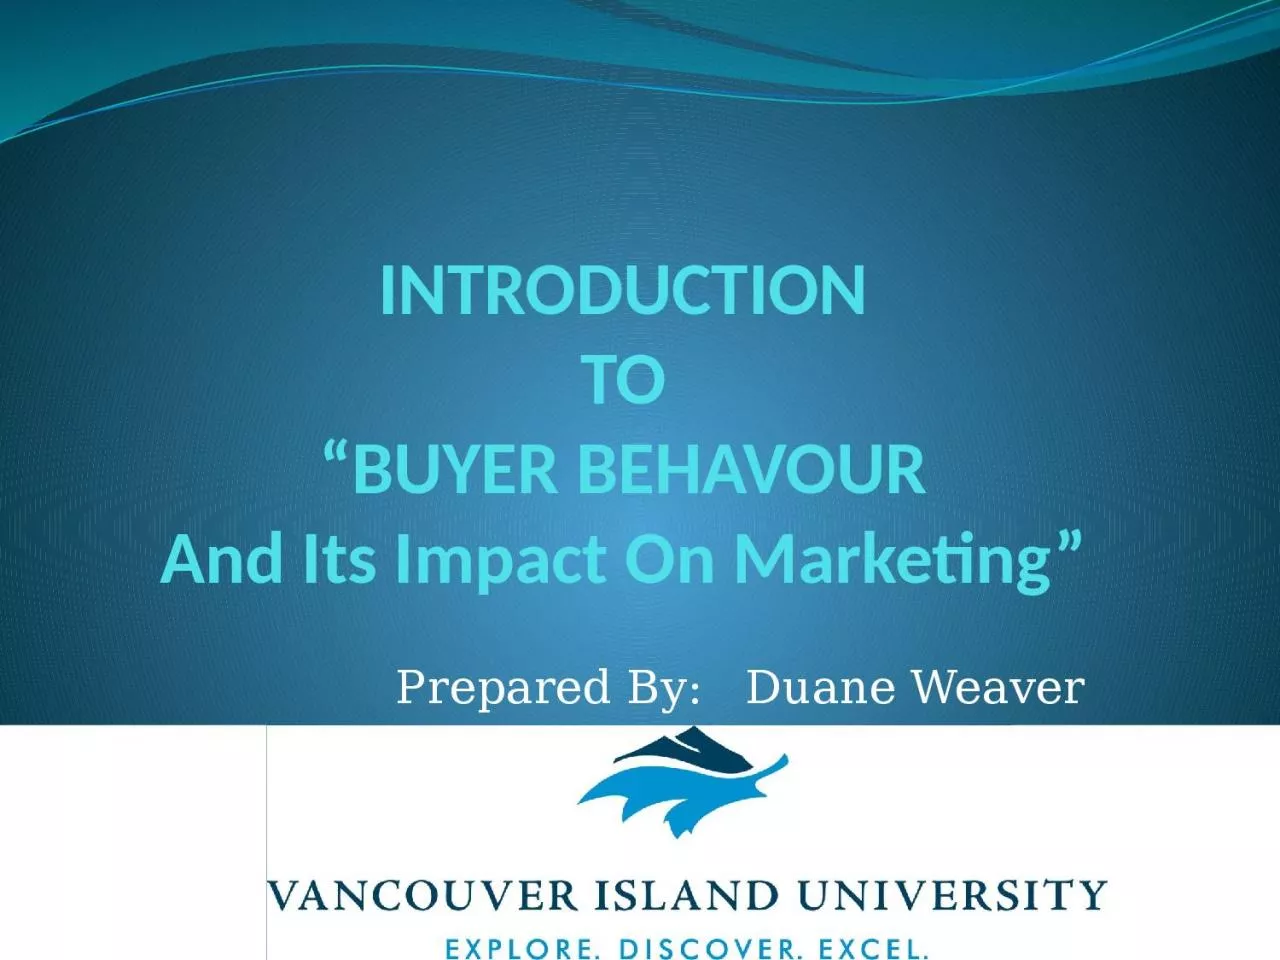 INTRODUCTION TO “BUYER BEHAVOUR